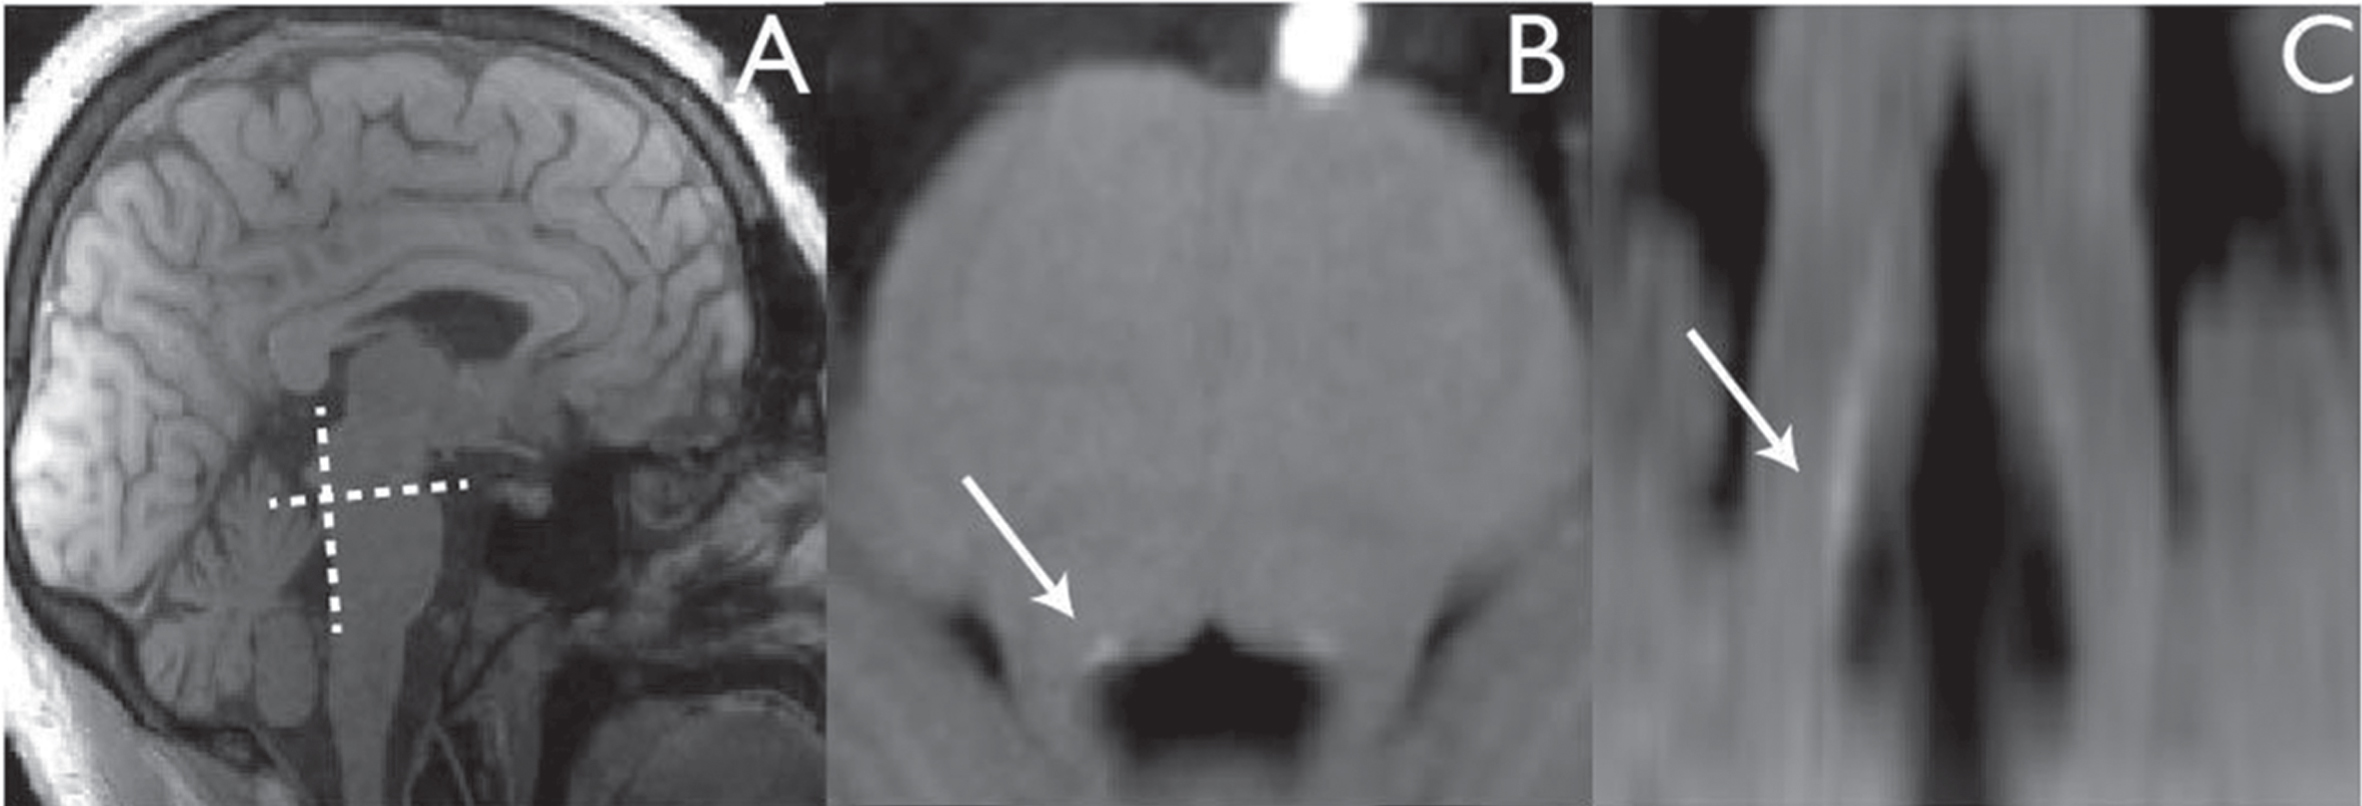 Visualization of human LC as an MRI hyperintense signal in the brainstem using T1-weighted MRI optimized to enhance neuromelanin LC content (white arrows), seen in axial (B) and coronal (C) planes acquired as shown in (A). Source [51] with permission.